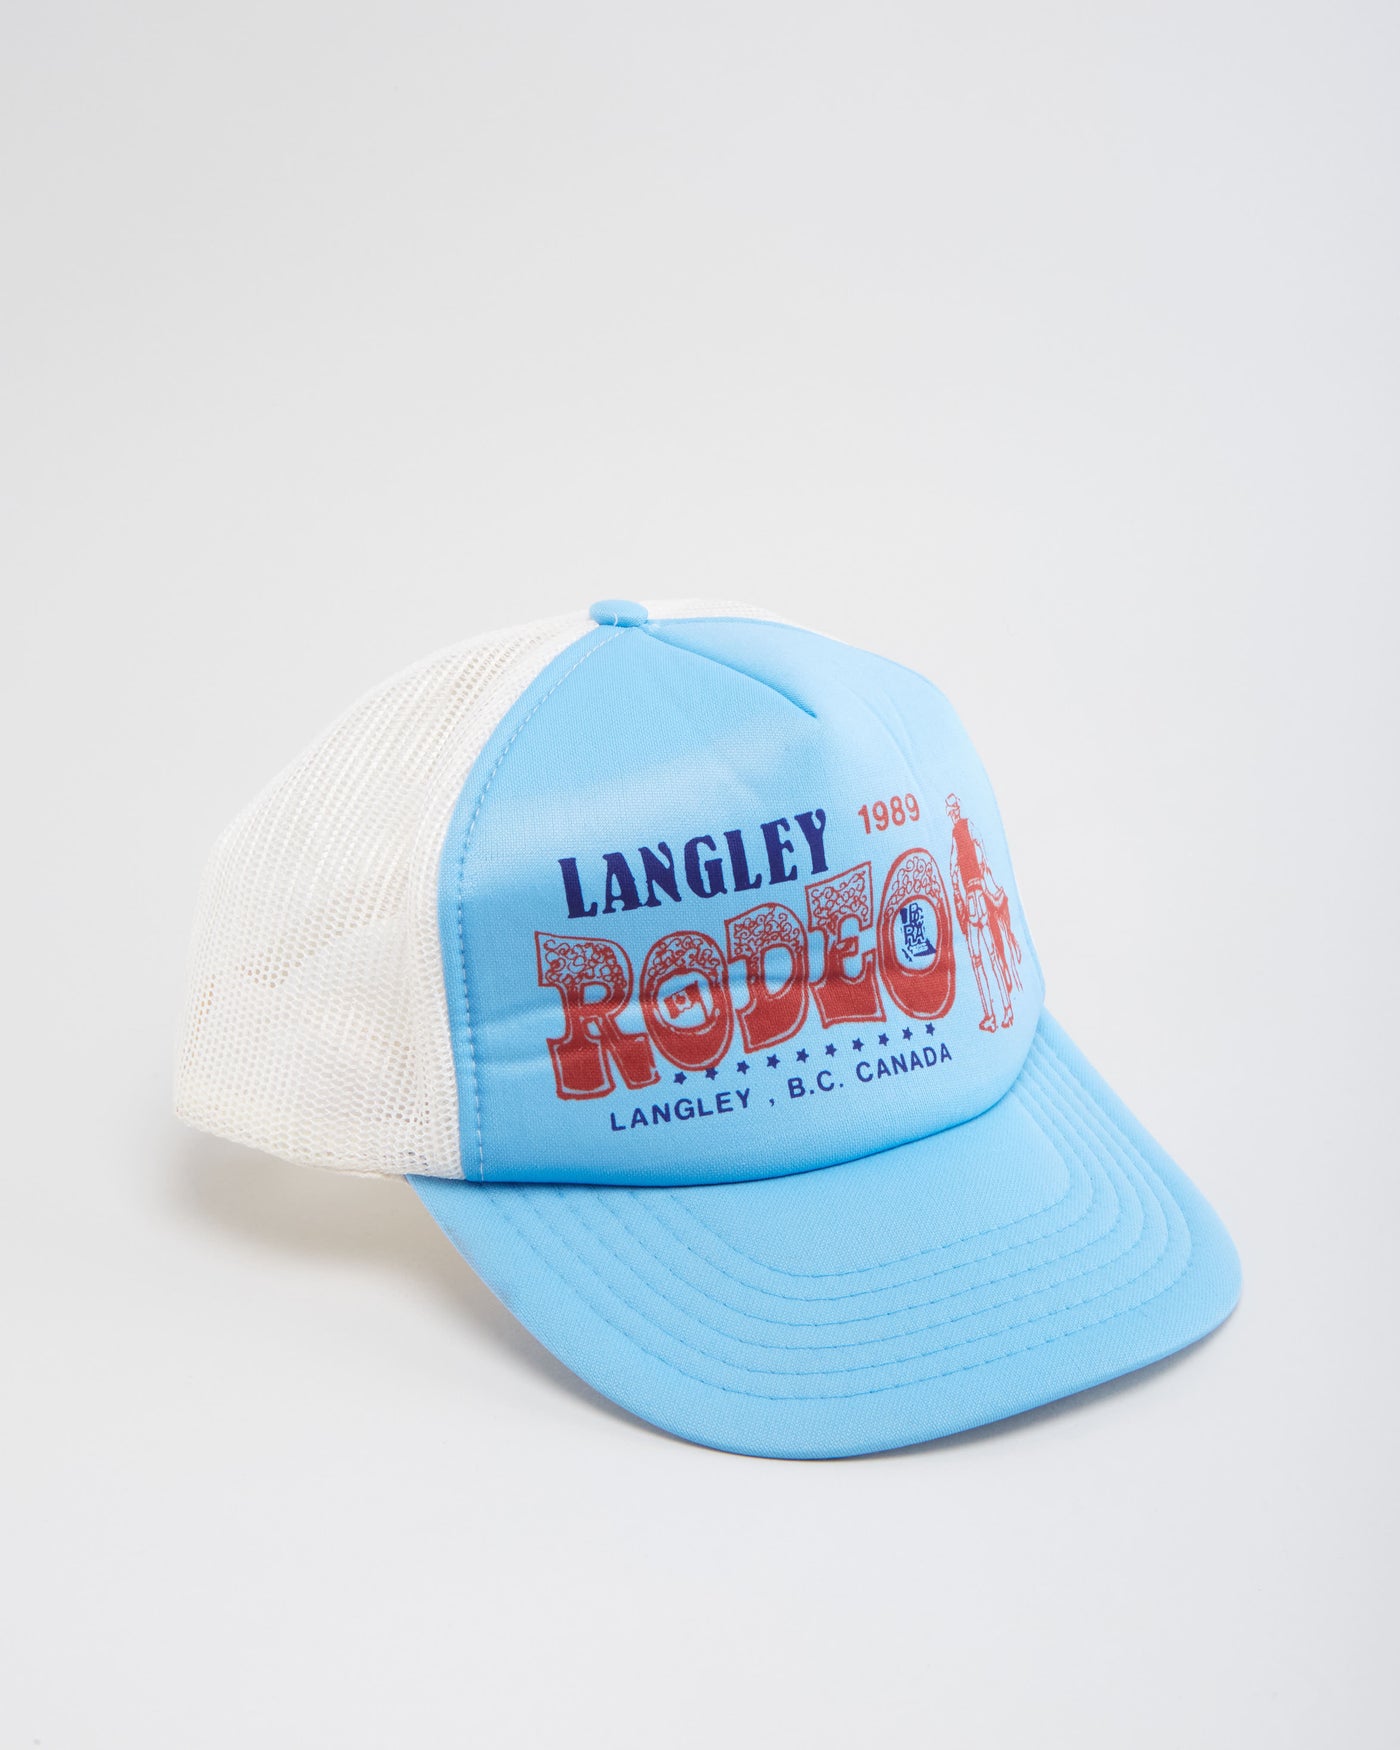 Vintage 1989 Langley Rodeo Canada Blue / White Trucker Hat